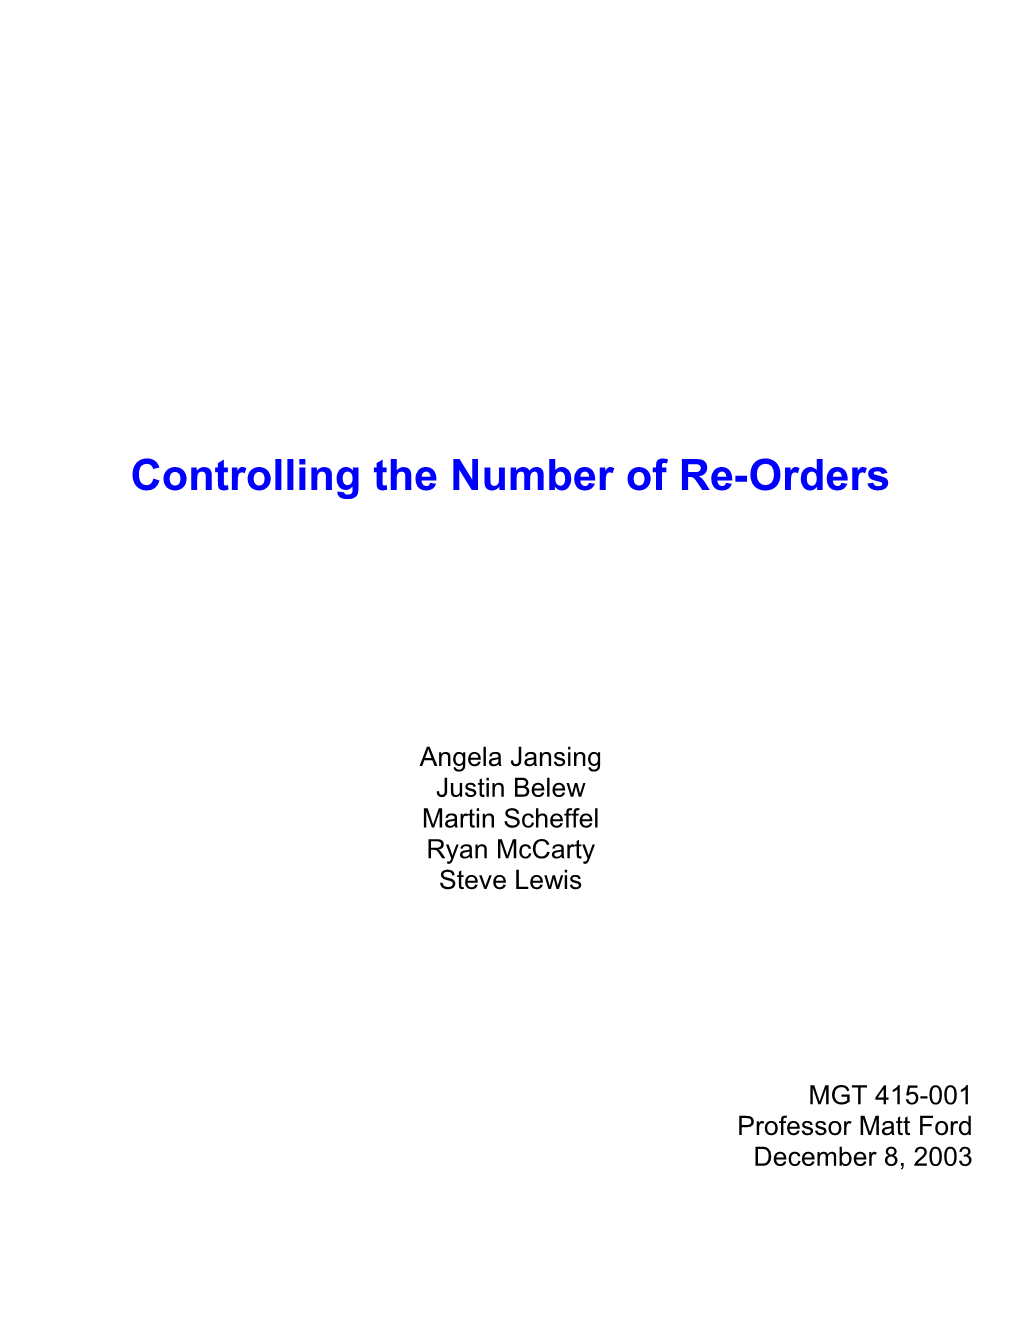 Controlling the Number of Re-Orders